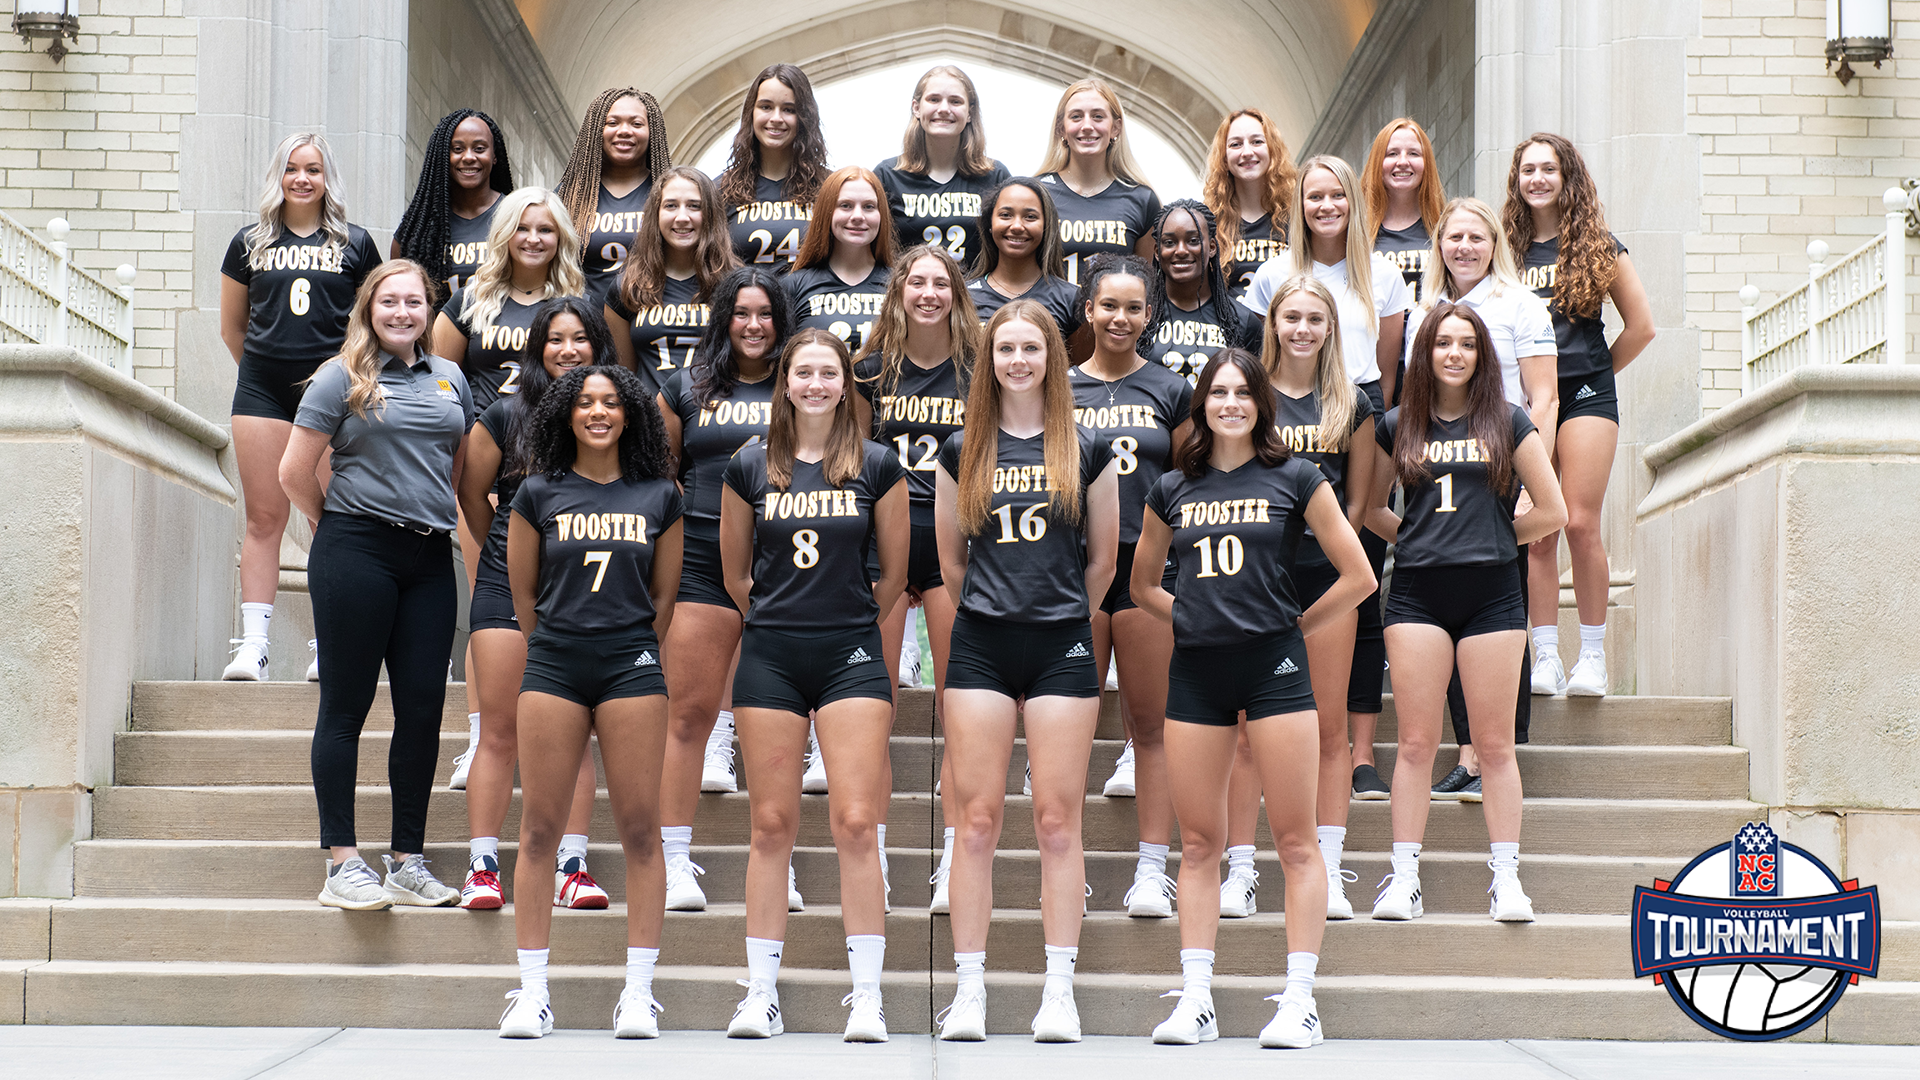 2021 College of Wooster Volleyball Team